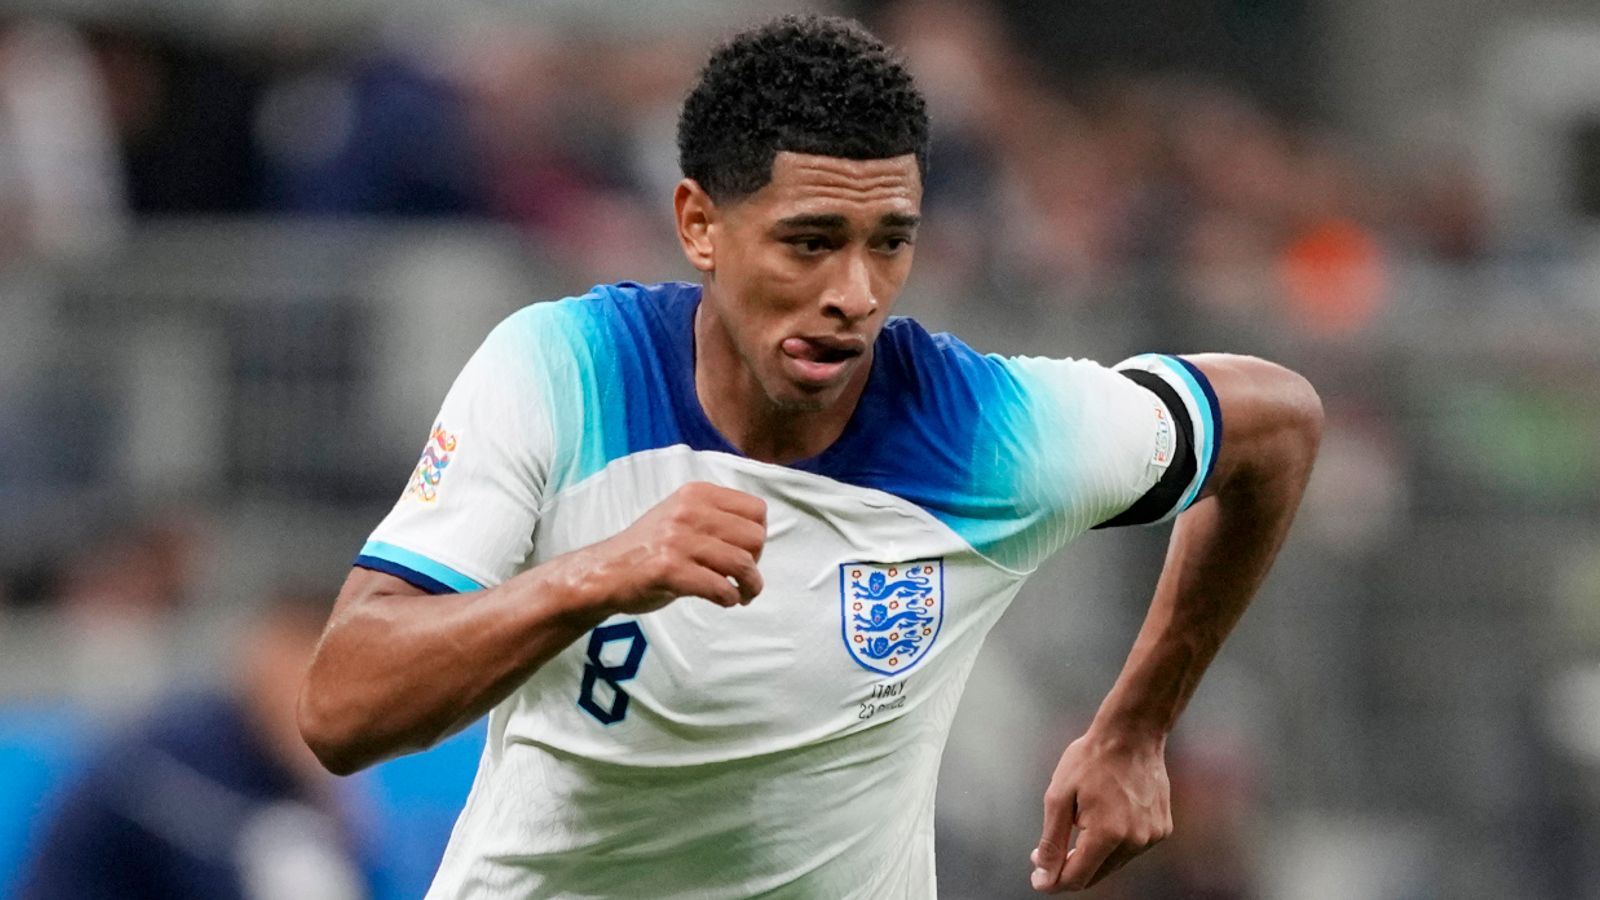 england-world-cup-squad-jamie-carragher-says-jude-bellingham-a-central-figure-james-maddison-a-wildcard-option-and-assesses-impact-of-reece-james-kyle-walker-injuries